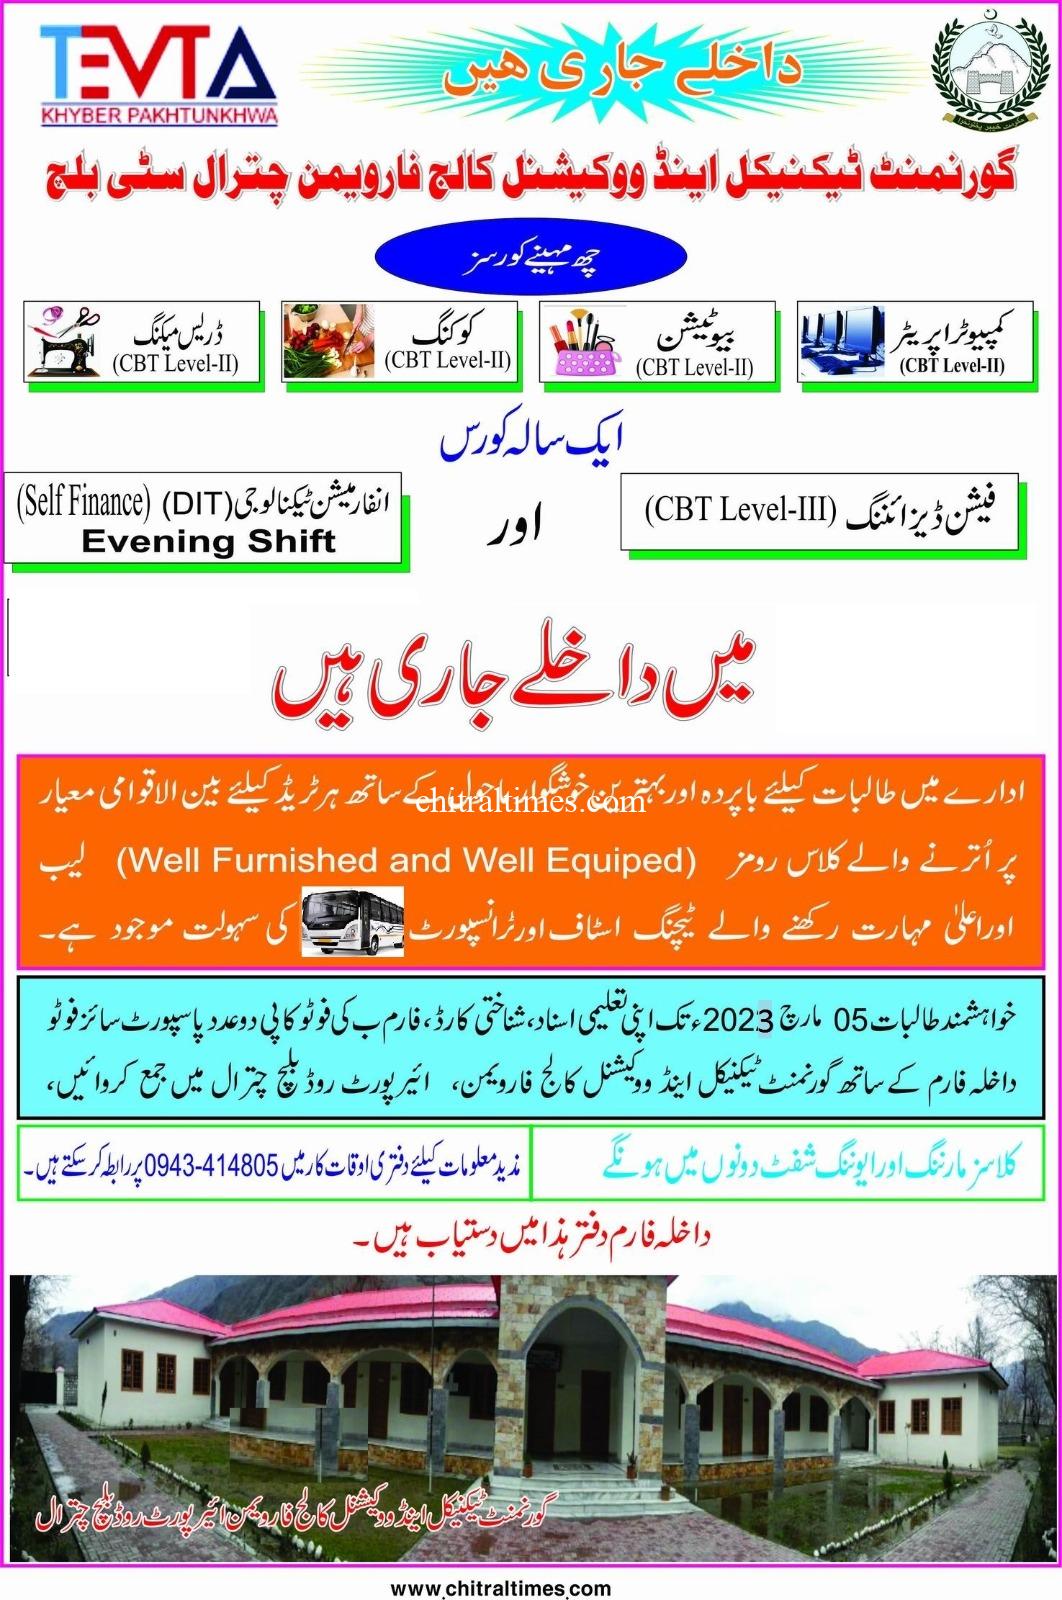 chitraltimes gtvc w admission open chitral